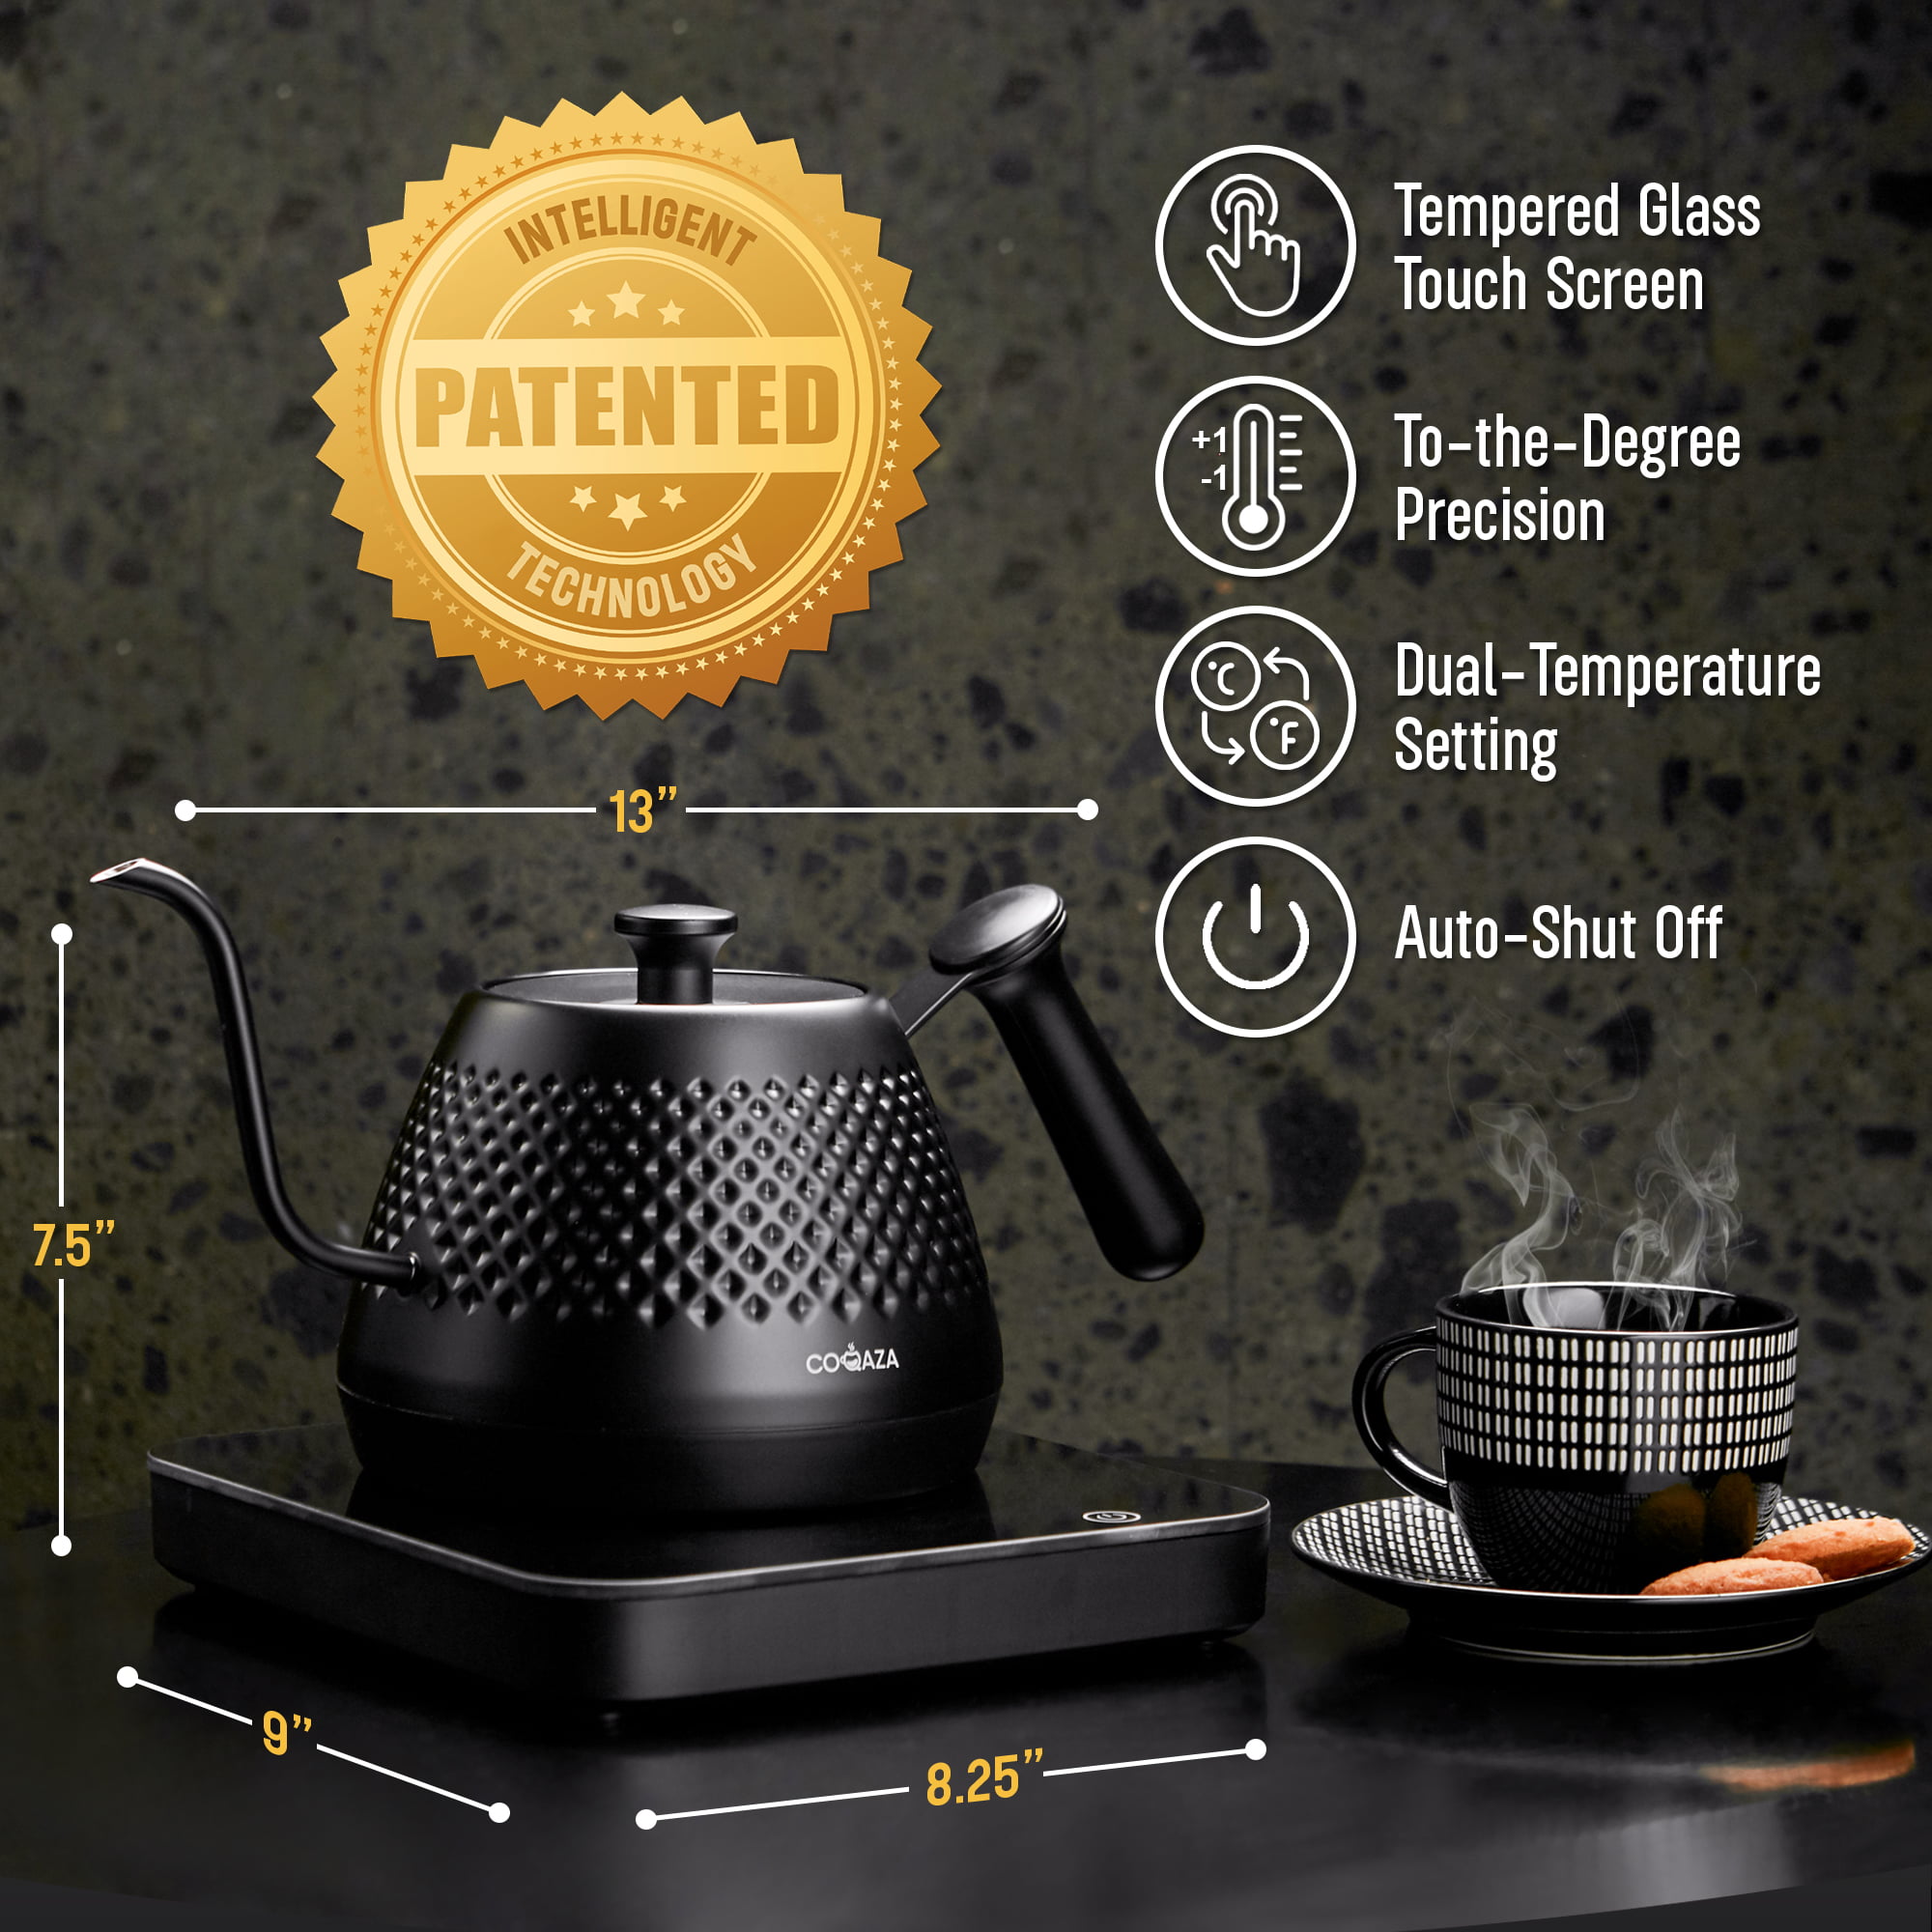 SPT 14.3-Cup Brown Ceramic Electric Kettle with Herb Cooking and